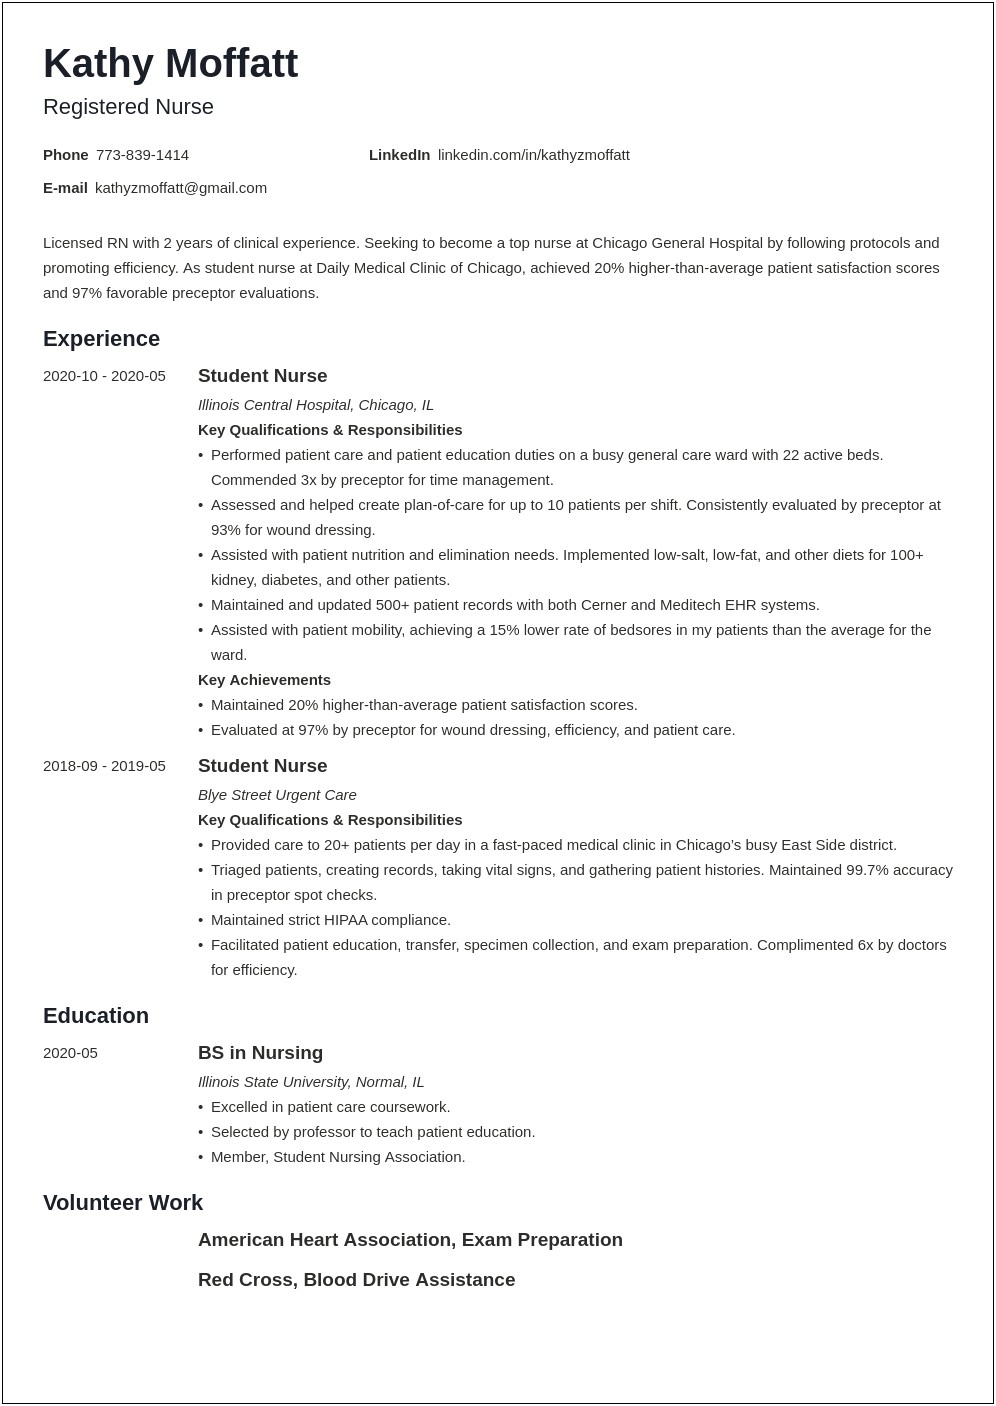 Resume Objective For Rn New Grad